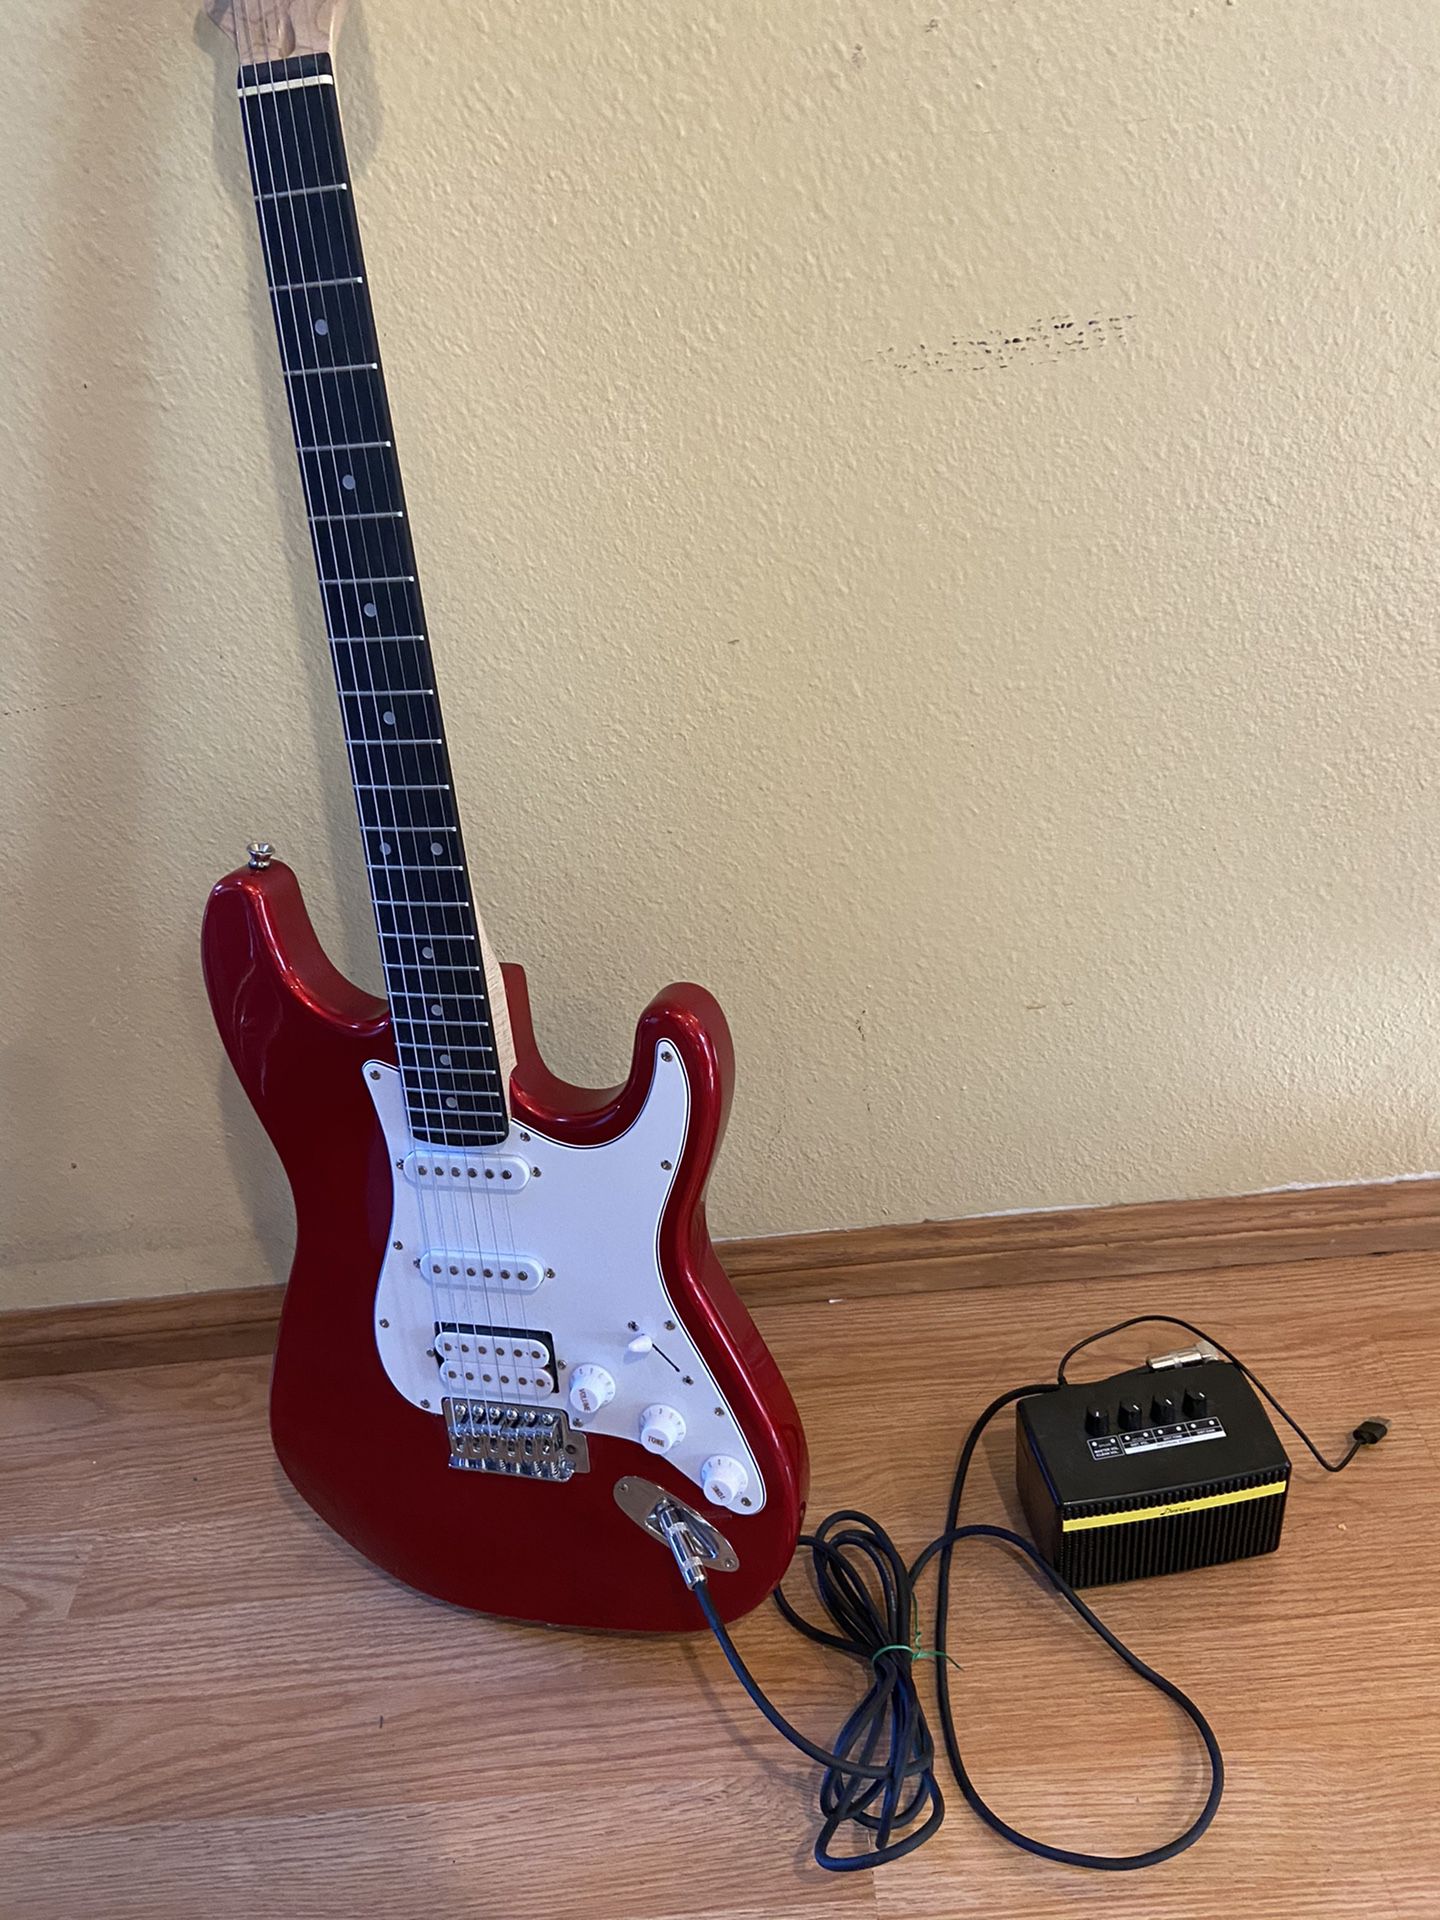 Electric guitar with cord and portable amp